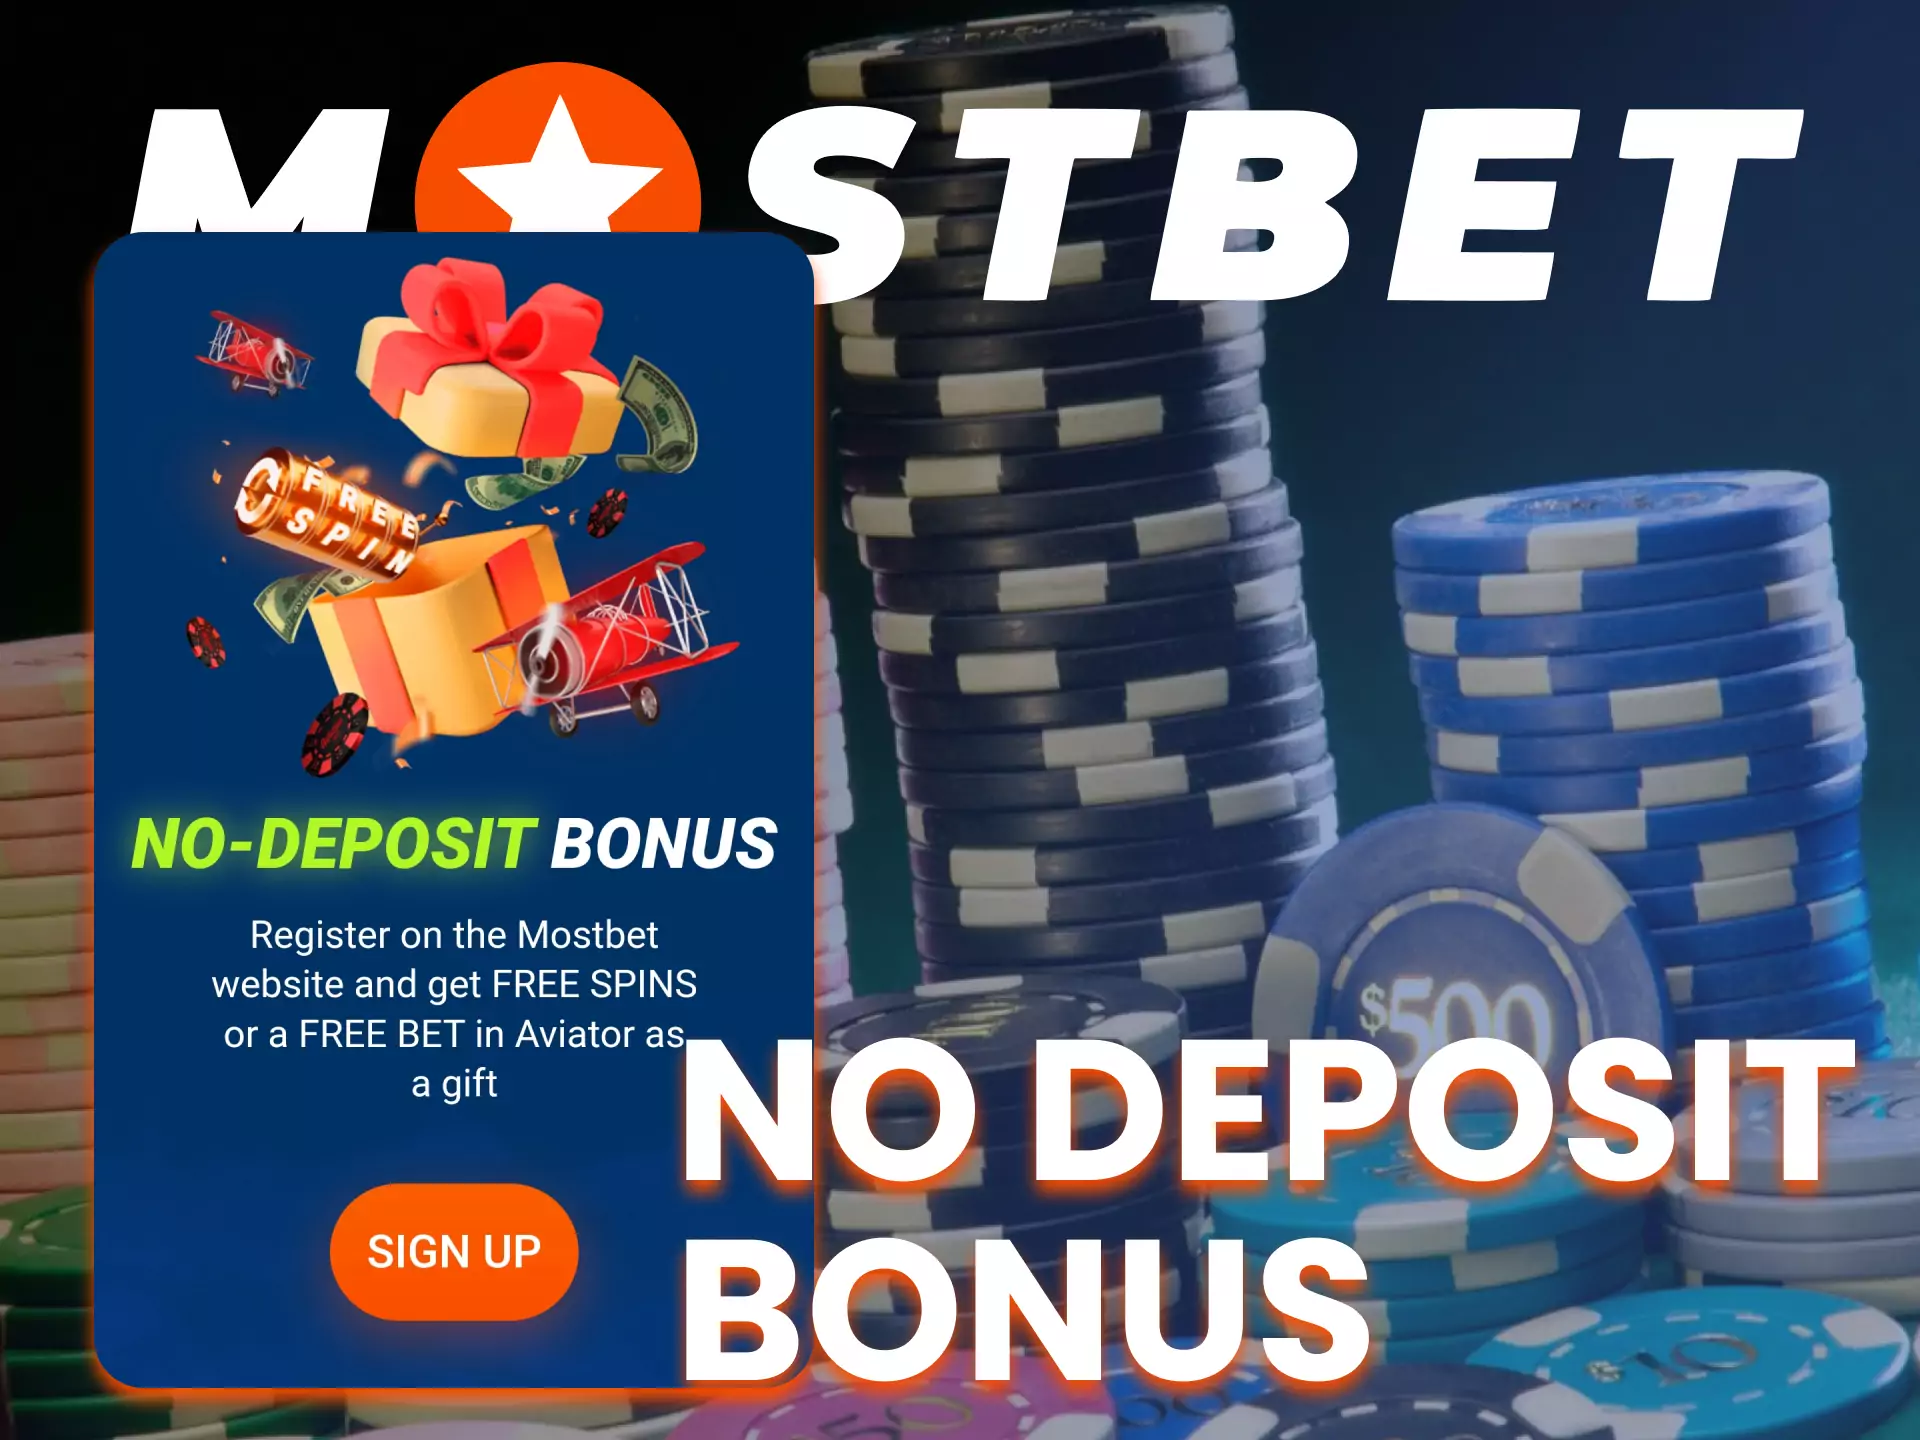 7 Easy Ways To Make Mostbet Bookmaker and Online Casino in India Faster